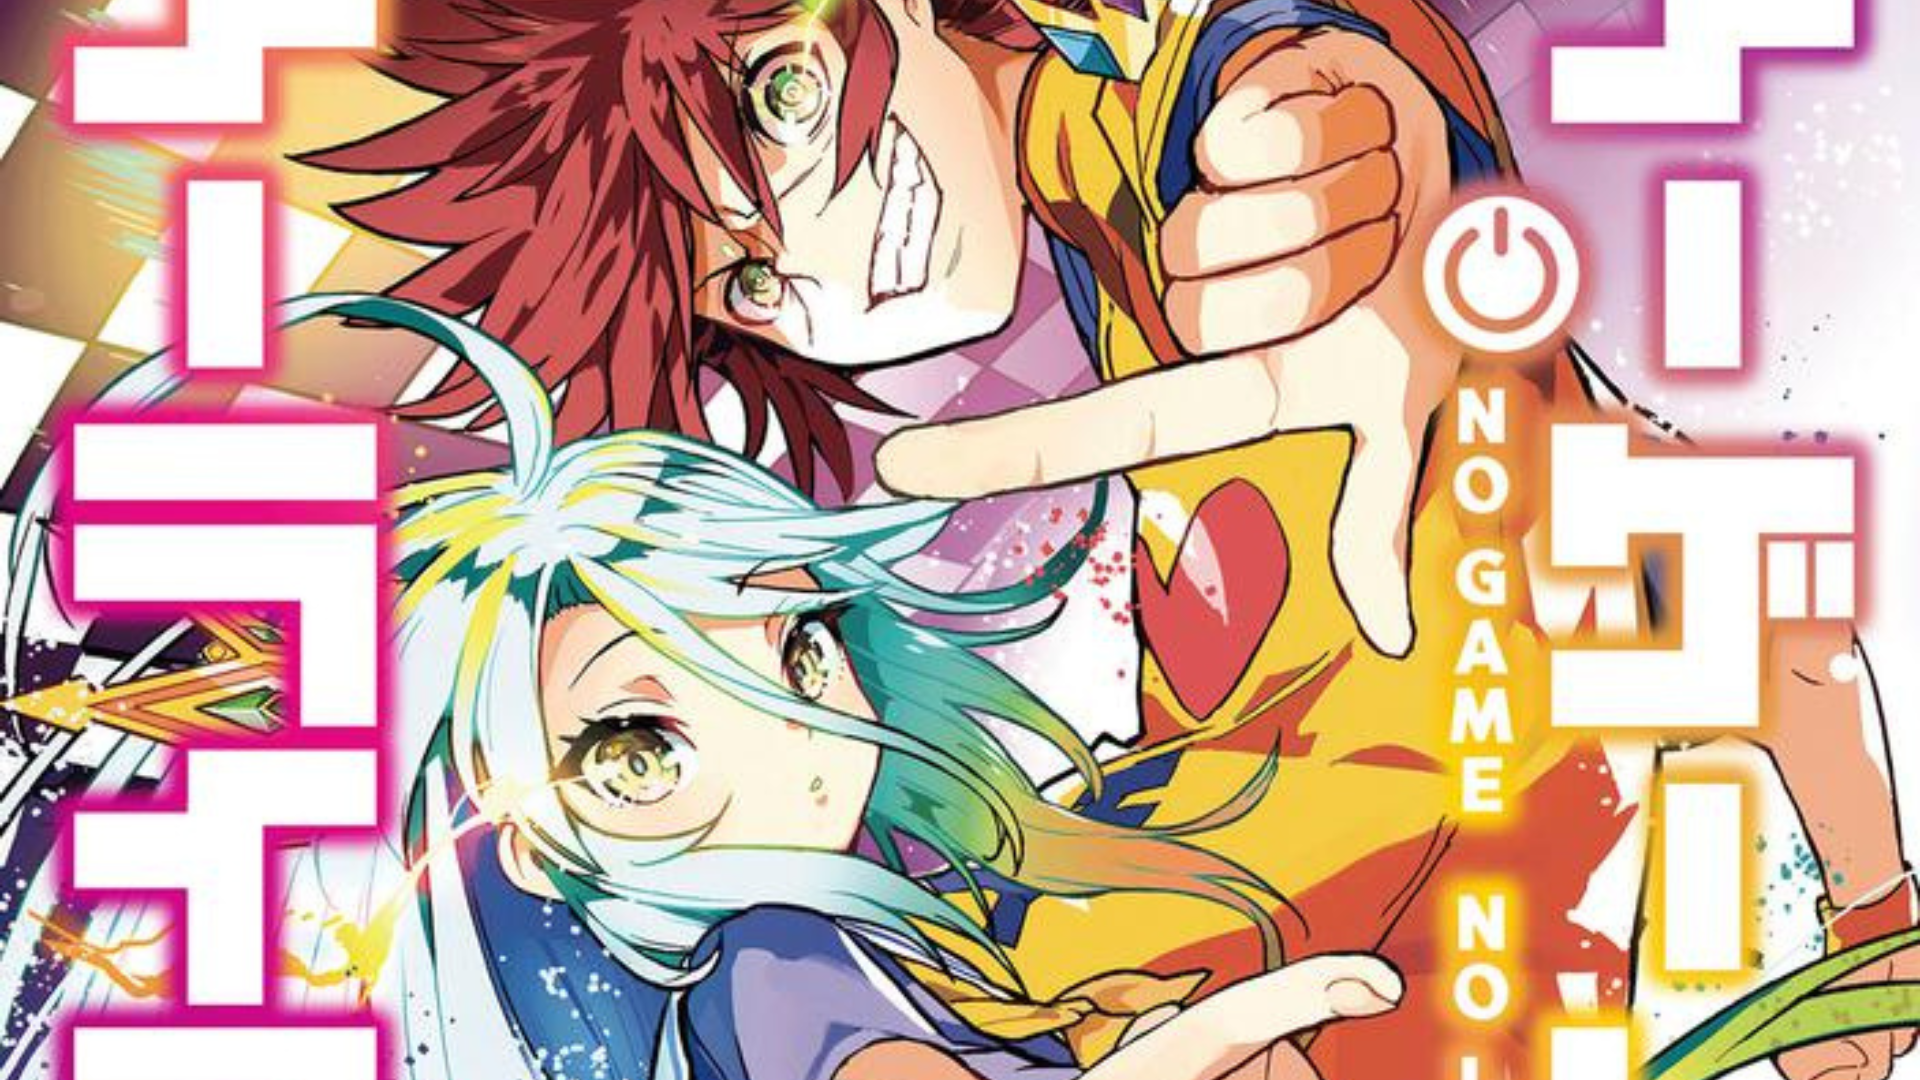 No Game No Life Manga Reveals Eastern Union Arc Cover for First Volume